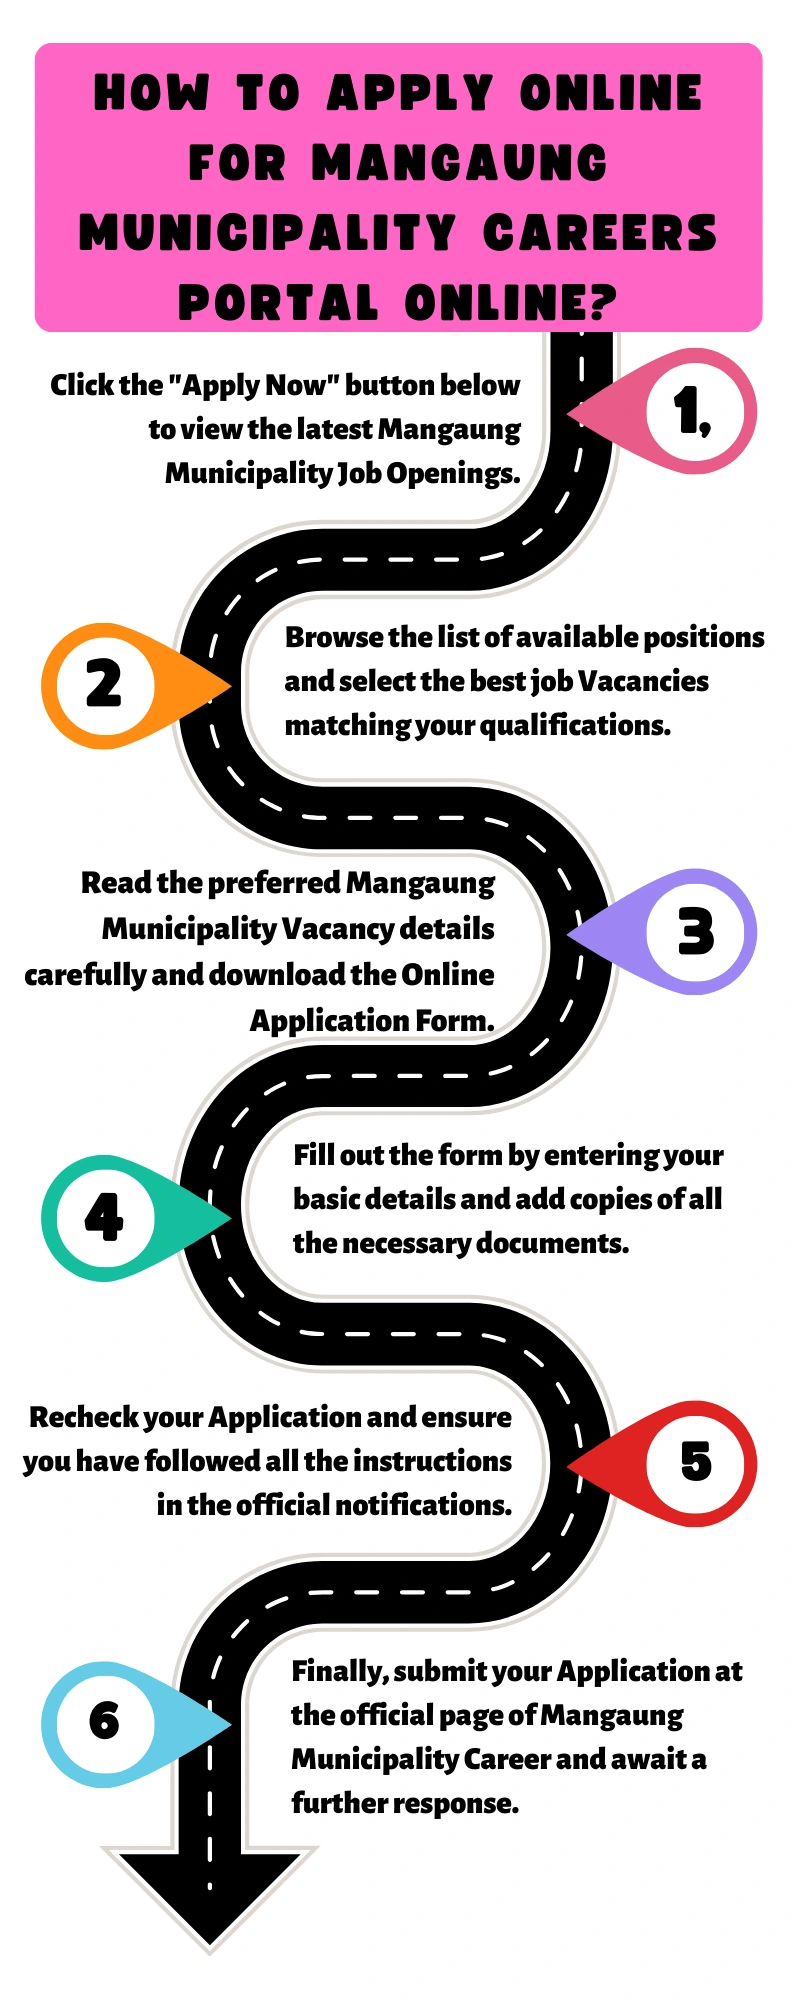 How to Apply online for Mangaung Municipality Careers Portal Online?